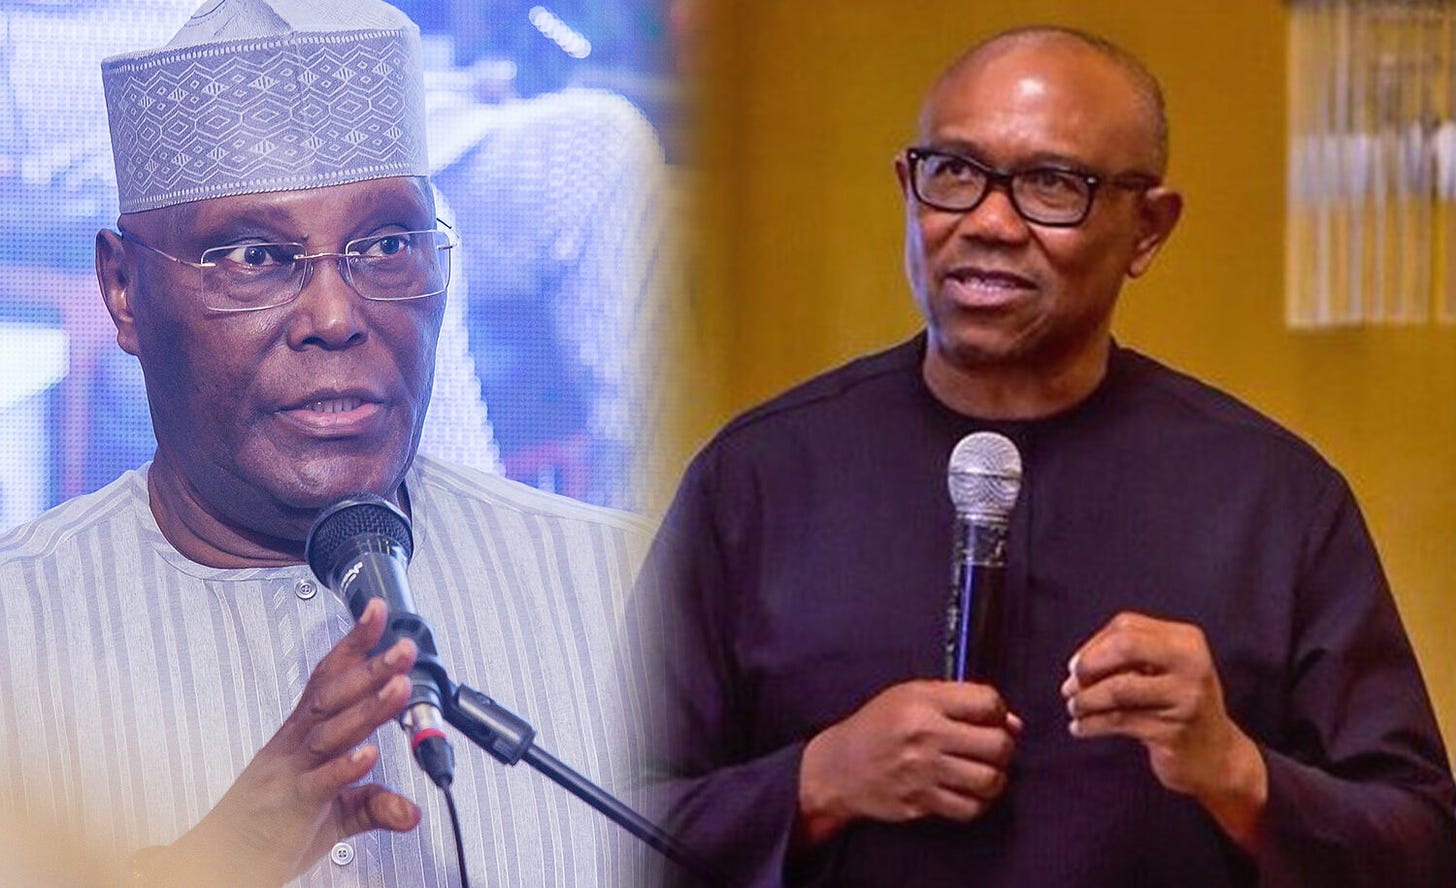 Presidential candidates of the Peoples Democratic Party (PDP) and Labour Party (LP), Atiku Abubakar and Peter Obi